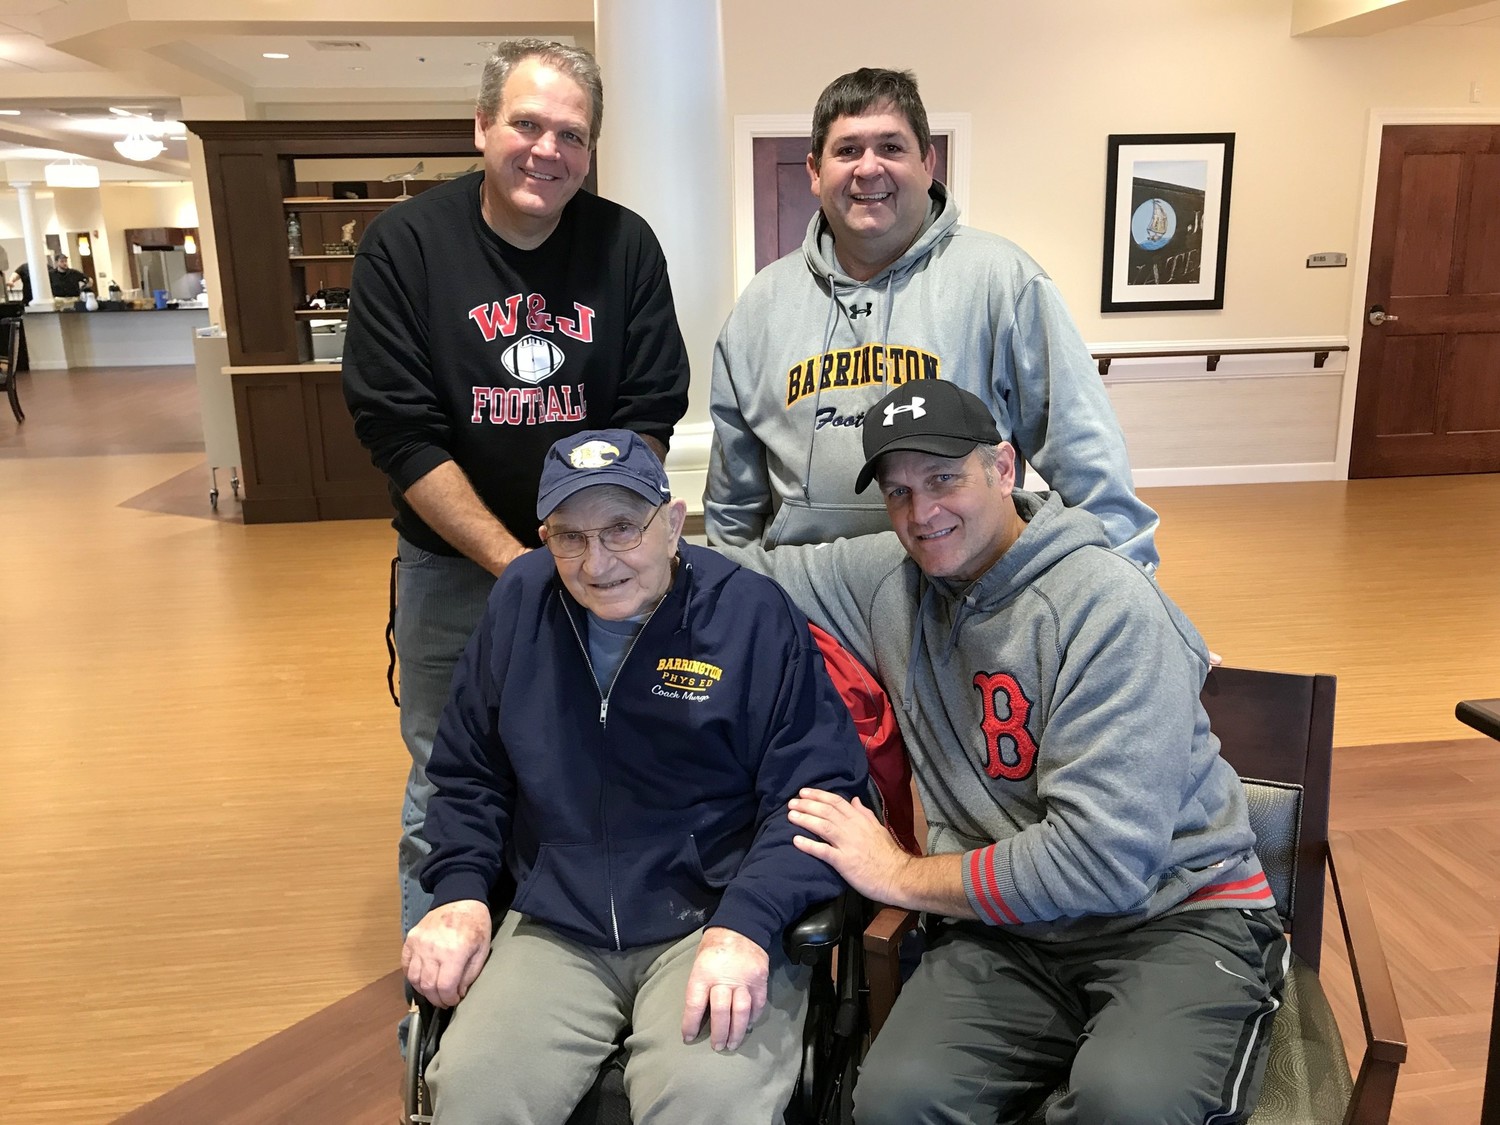 Coach Frank Murgo (seated left) is surrounded by (from left to right clockwise) Bruce Murgo, TR Rimoshytus, and Matt Murgo.